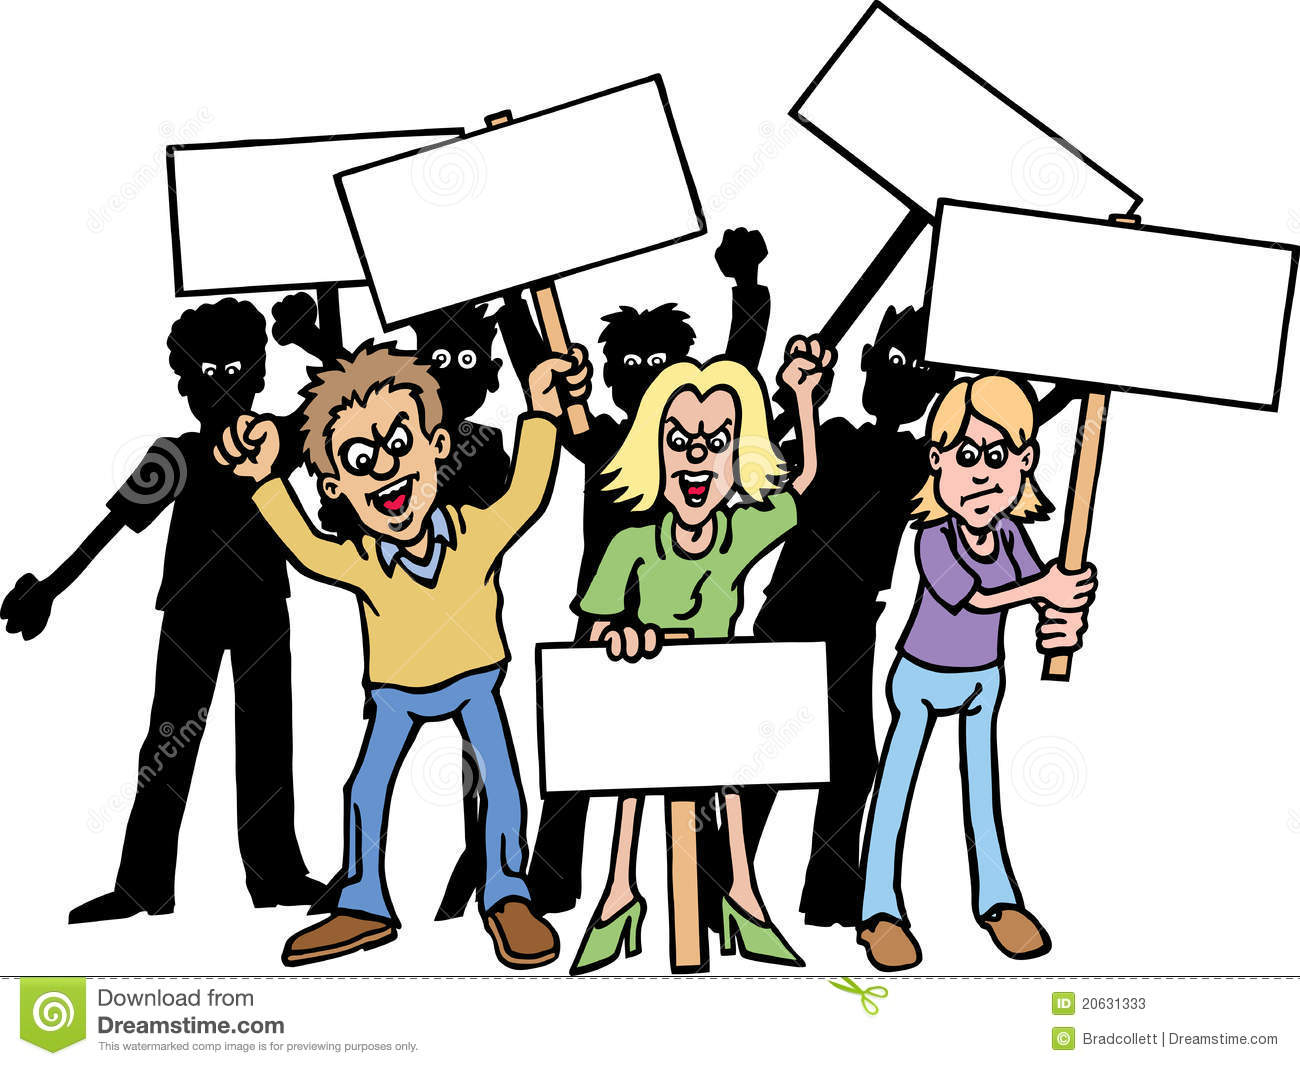 241 Protest free clipart.